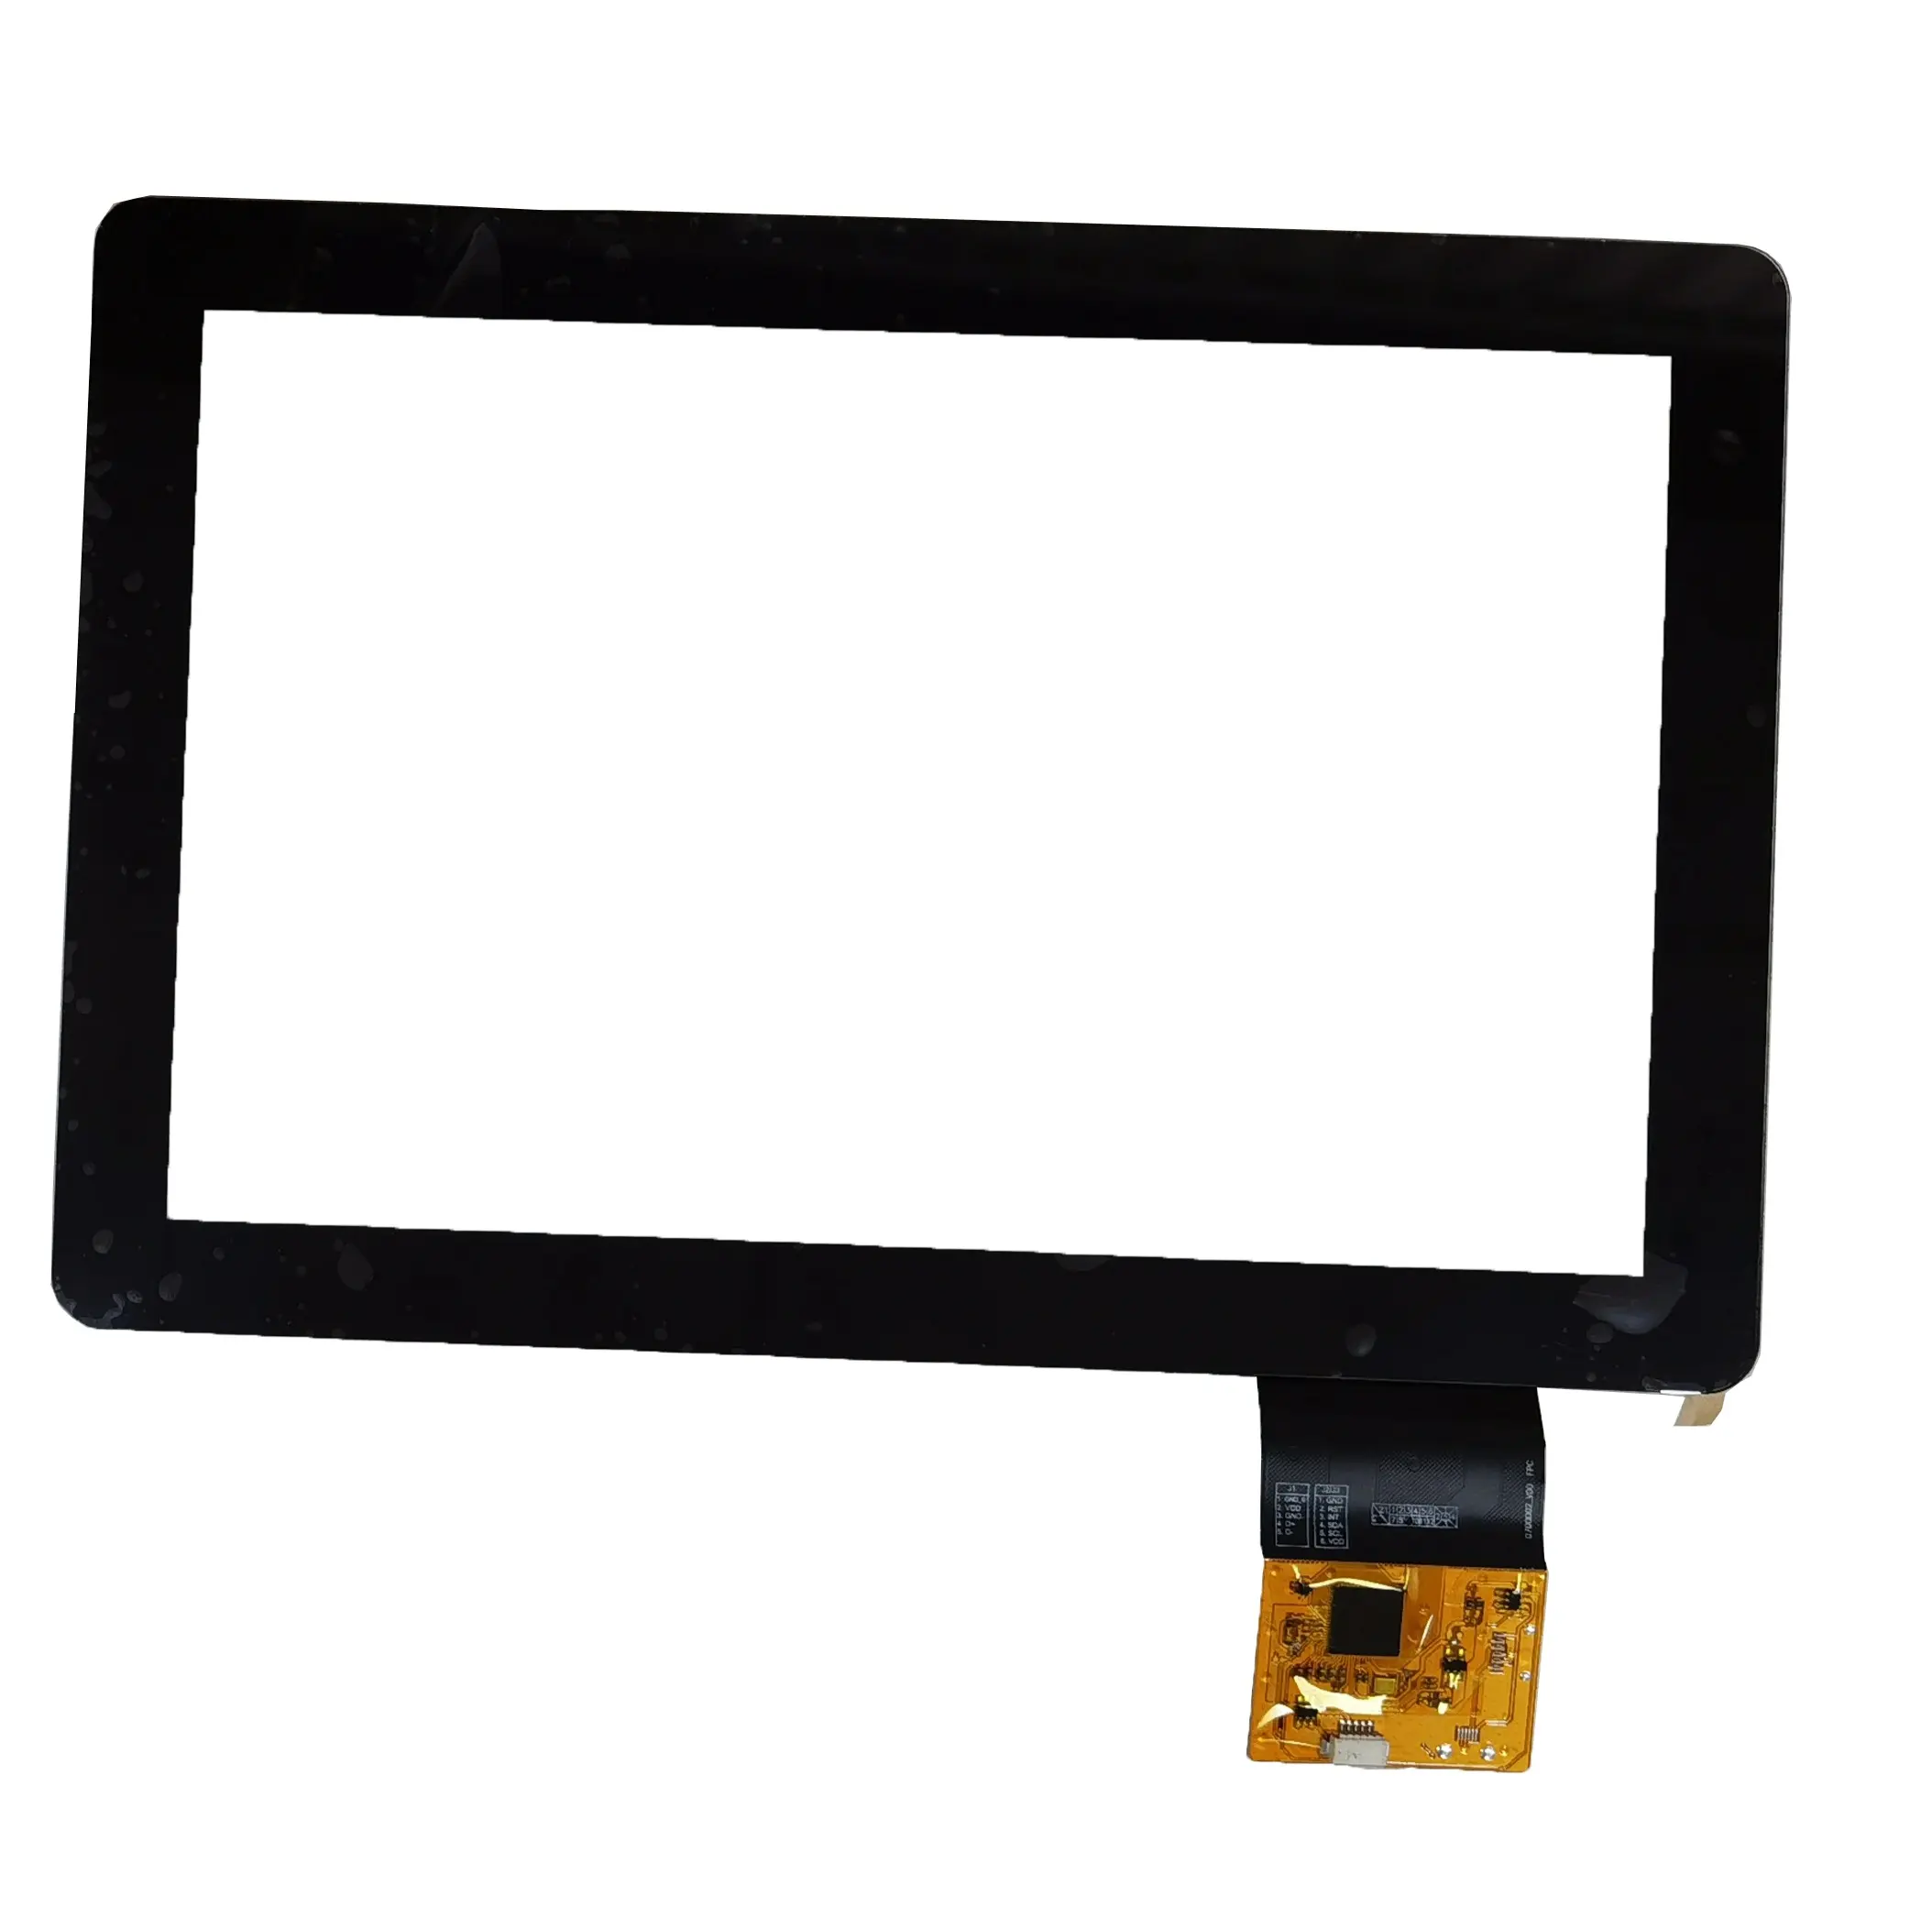 Industrial Touch Screen Panel Pc Cheap New-designed Chinese Factory Supplier 10.1inch 16-10 Capacitive Touch Screen Module Usb